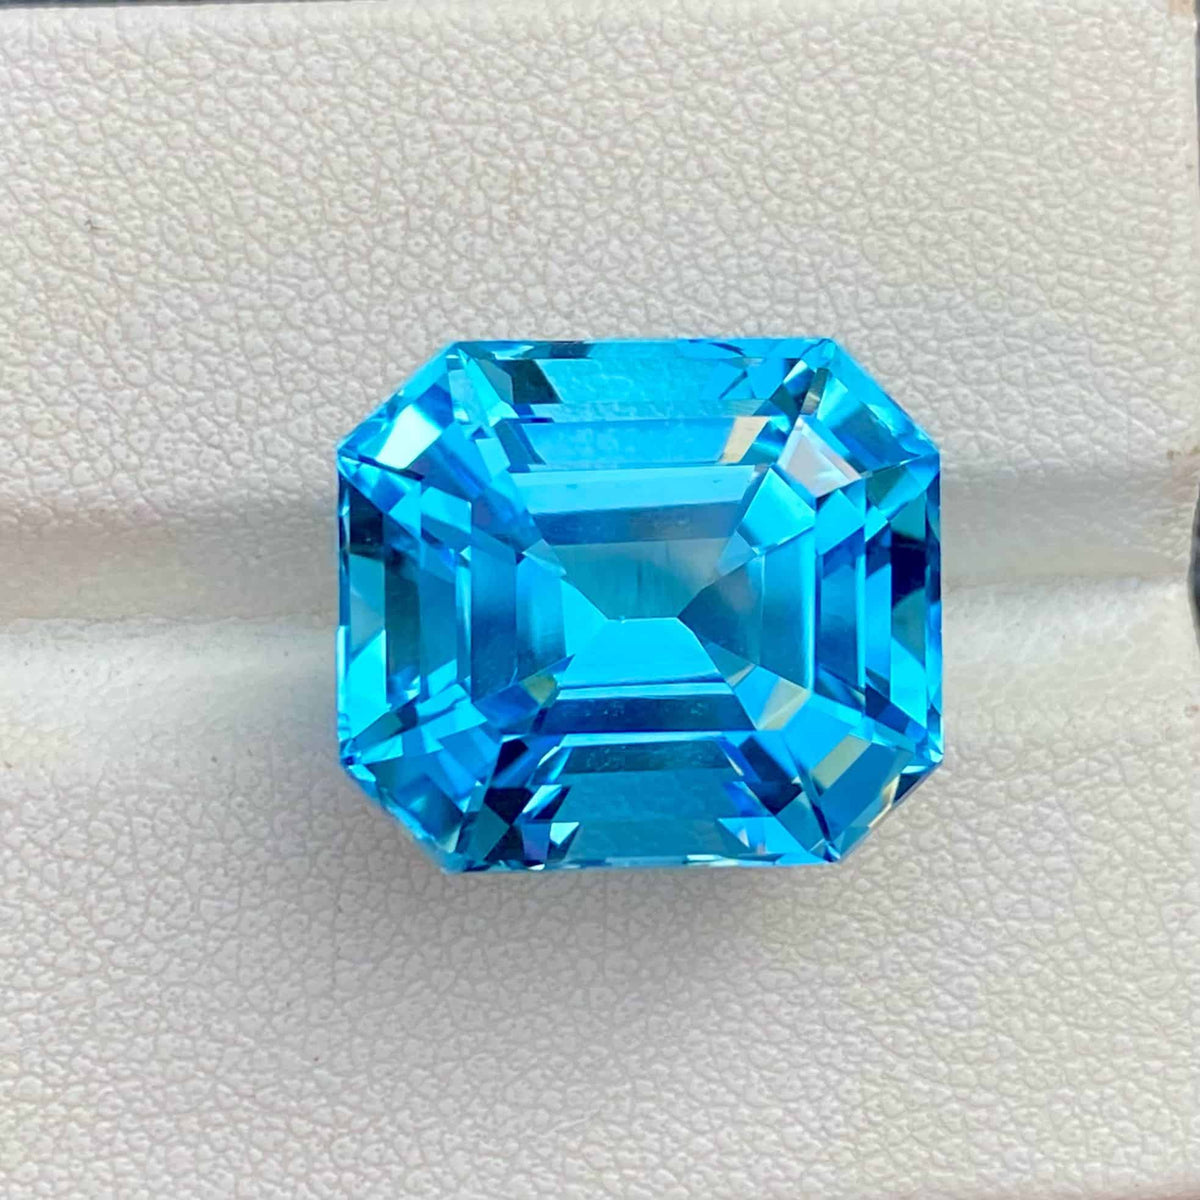 Faceted Bright Sky Blue Topaz